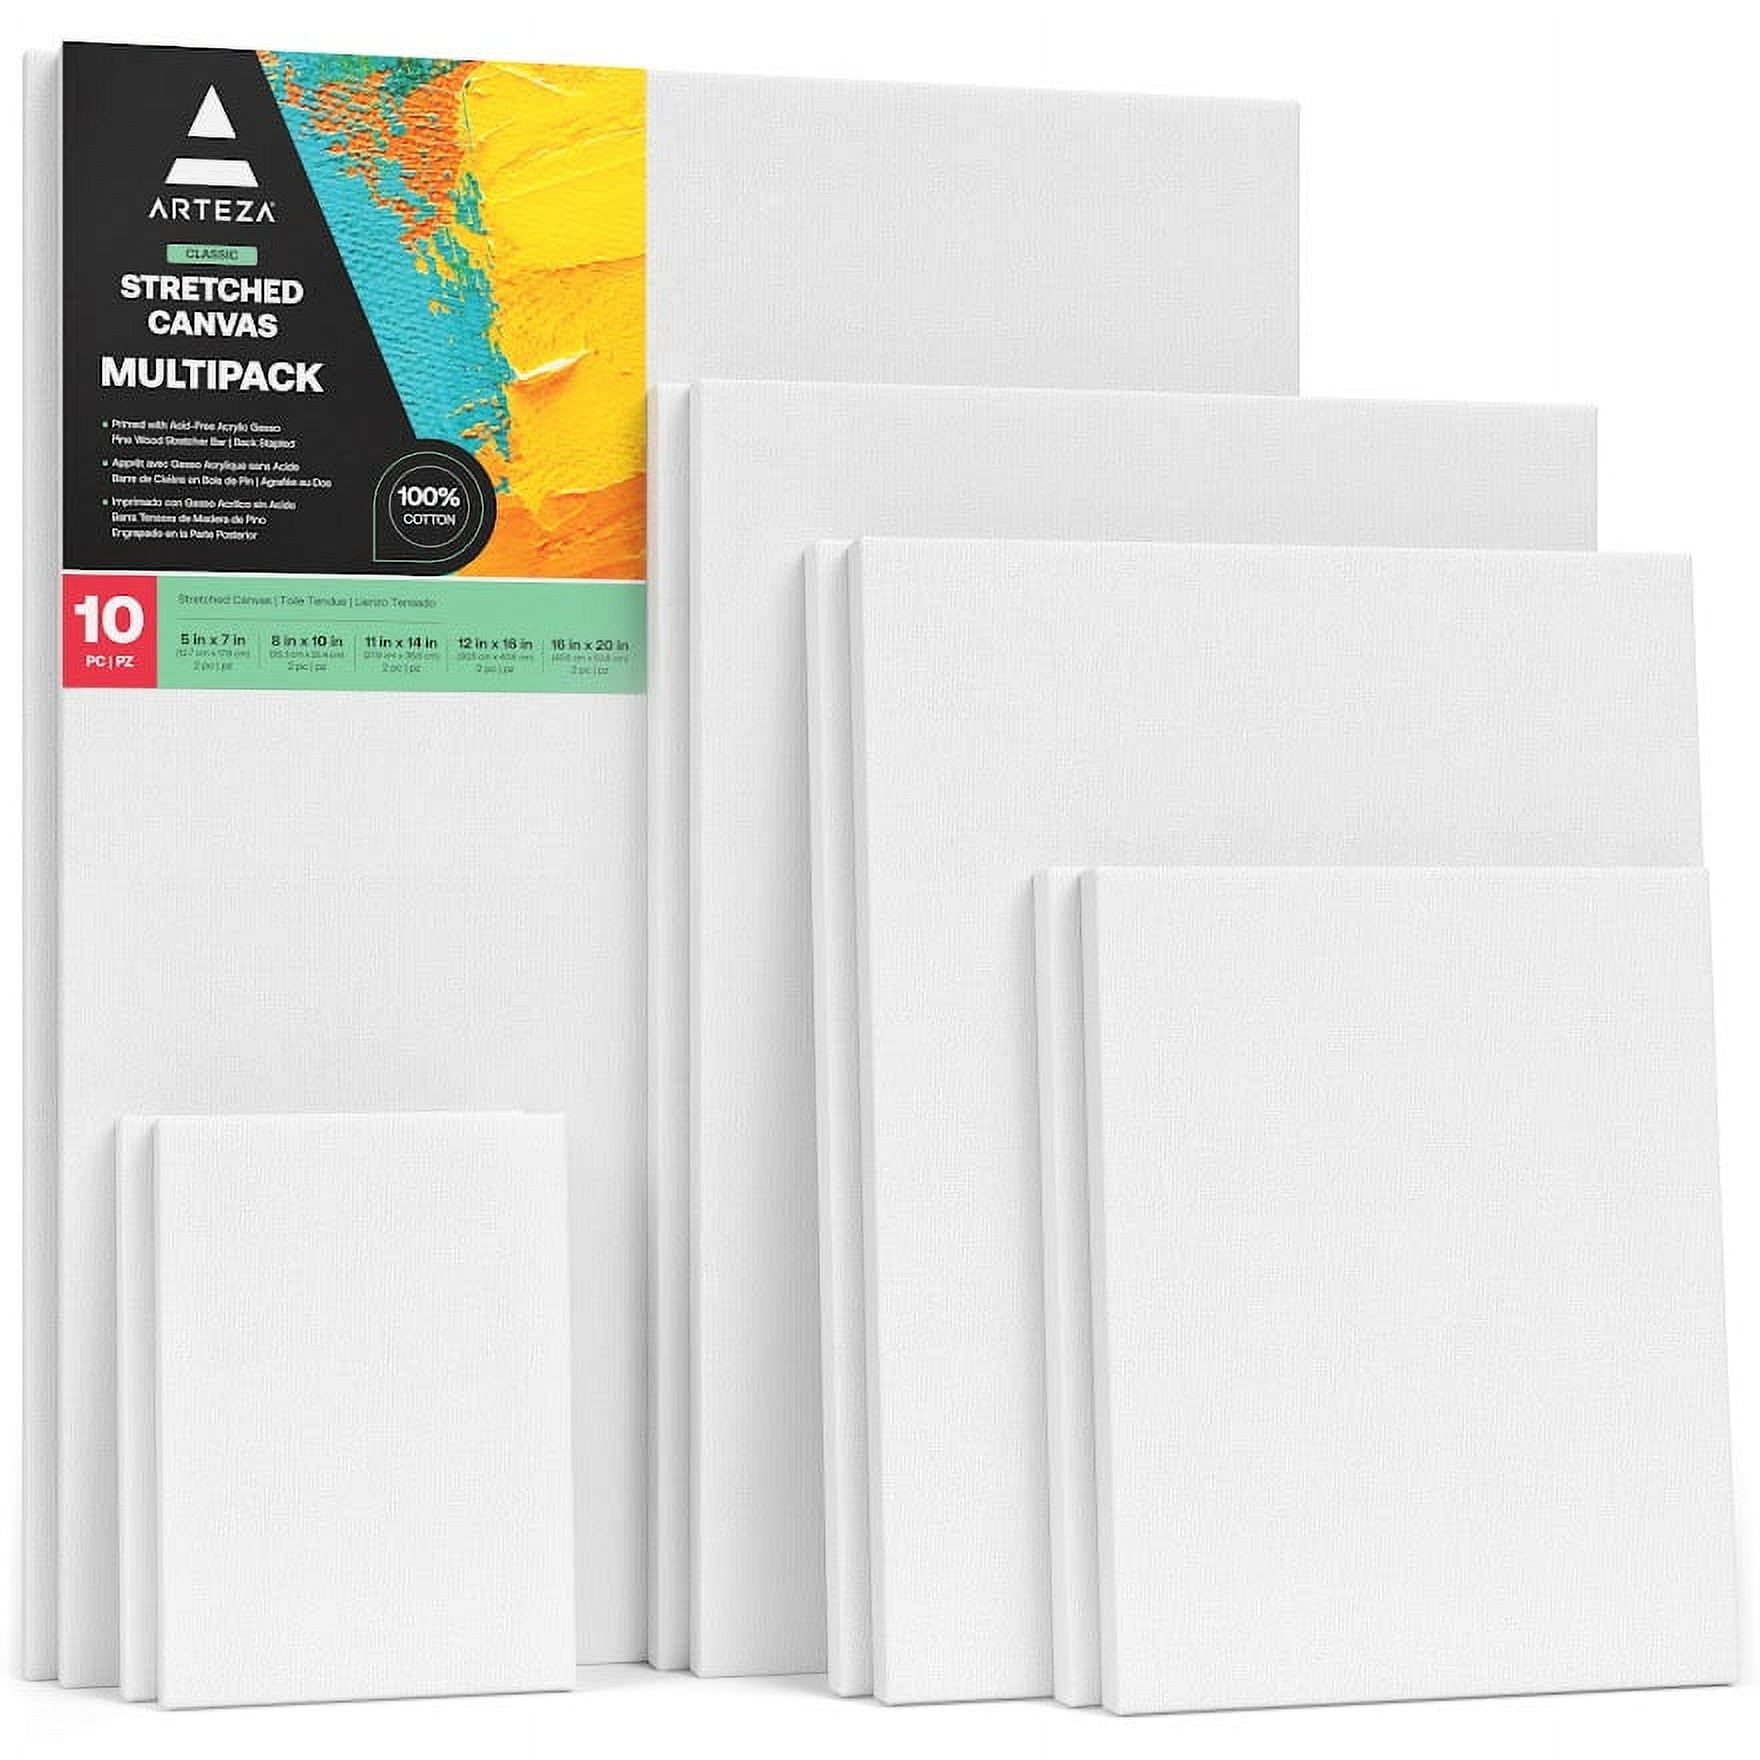  Large Canvases for Painting 36x48 Inch 2-Pack, 12.3 oz Triple  Primed Acid-Free 100% Cotton Stretched Canvas, Blank Large Canvas for Oil  Paint Acrylics Pouring & Wet Art Media